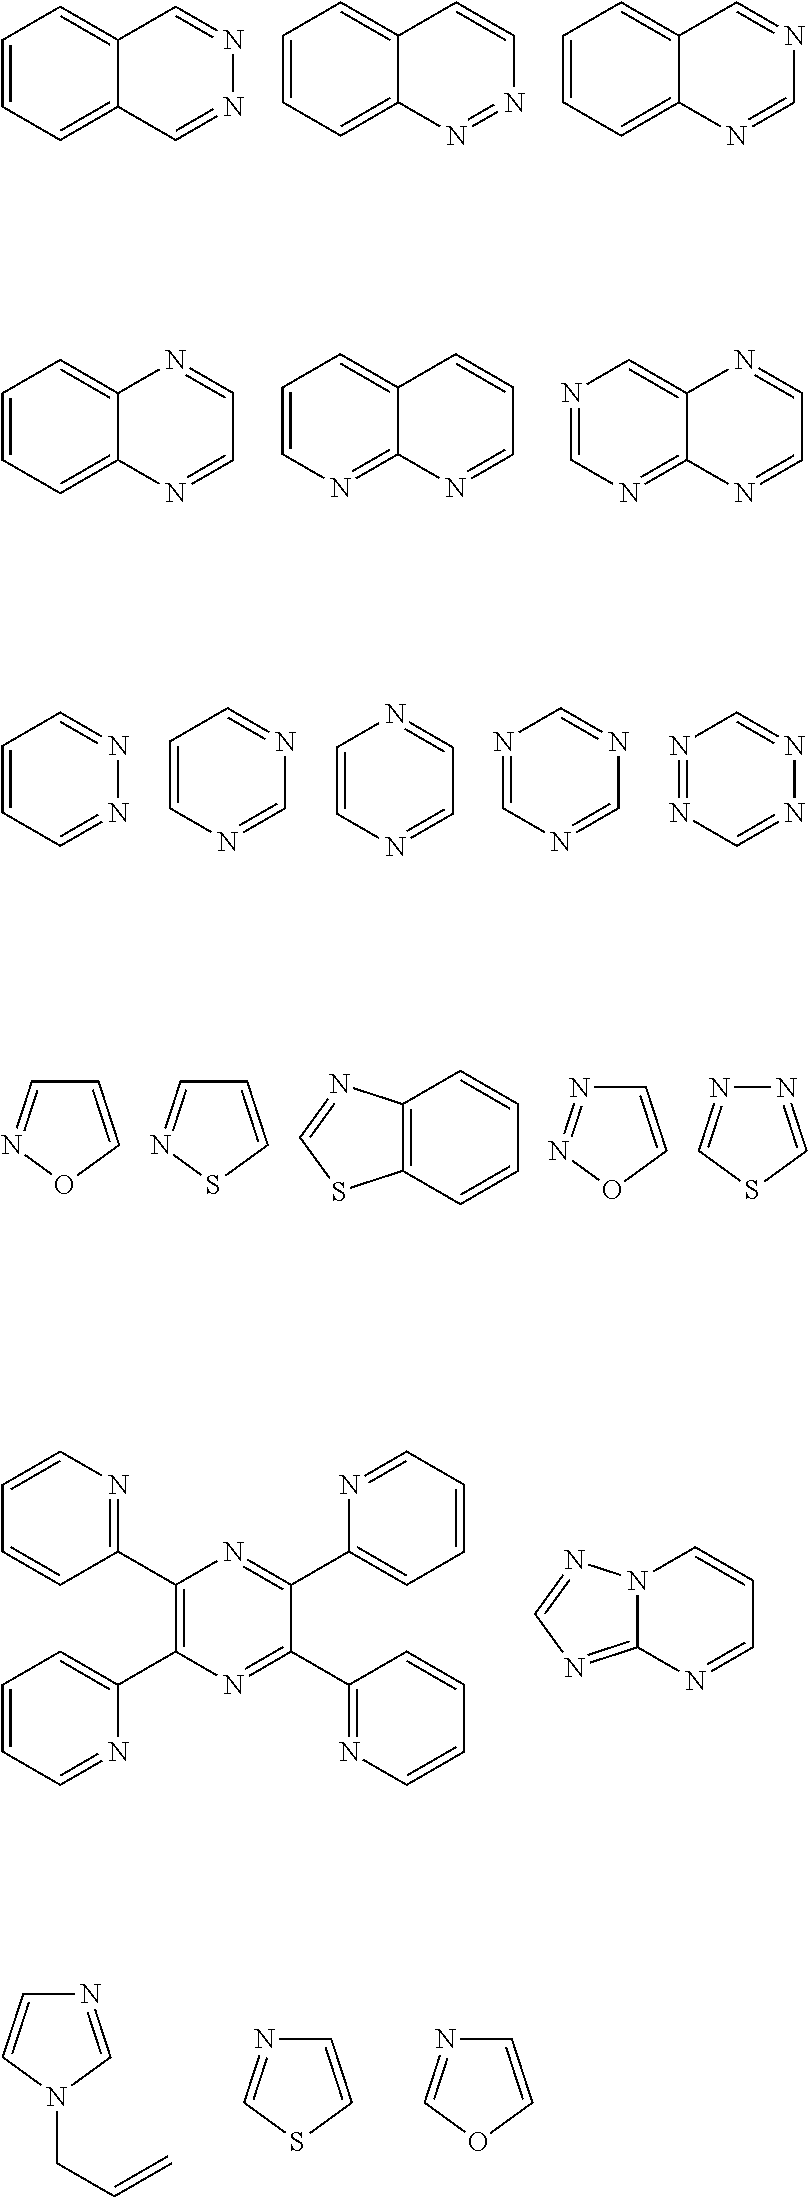 Functionalized polymers and processes for making same